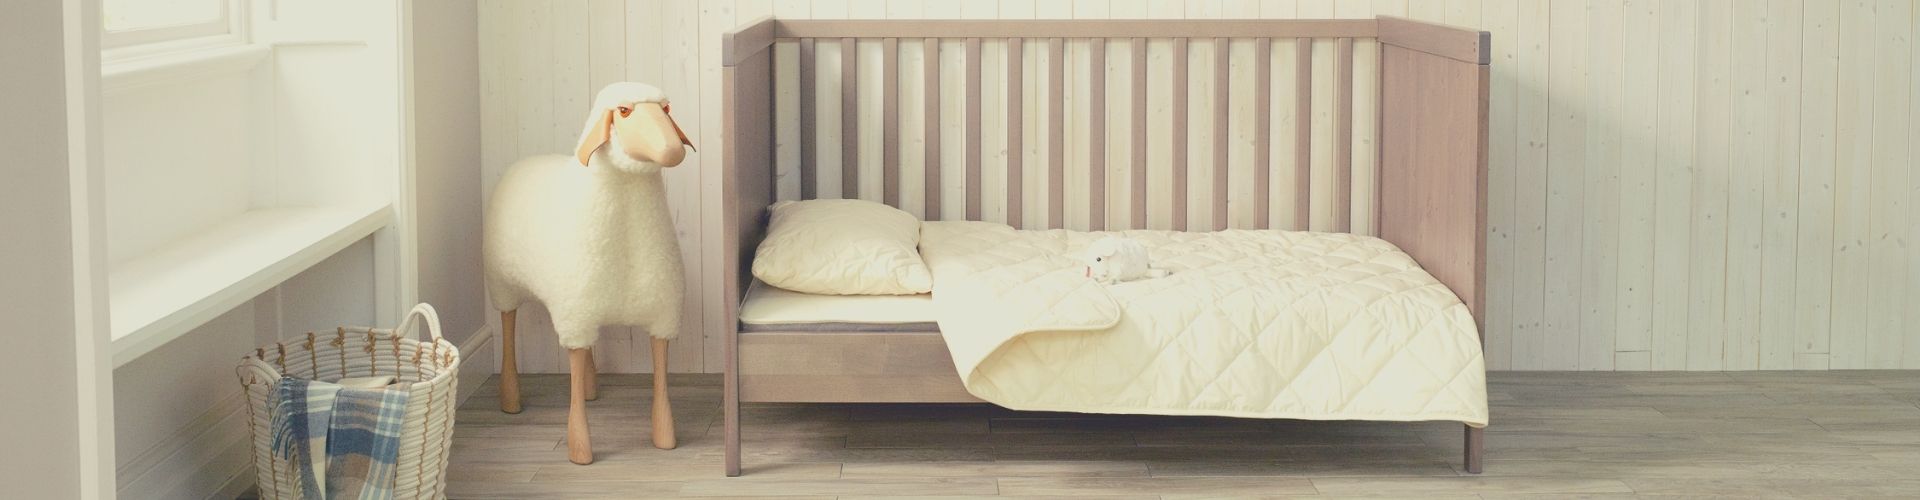 baby bedding set from Woolroom